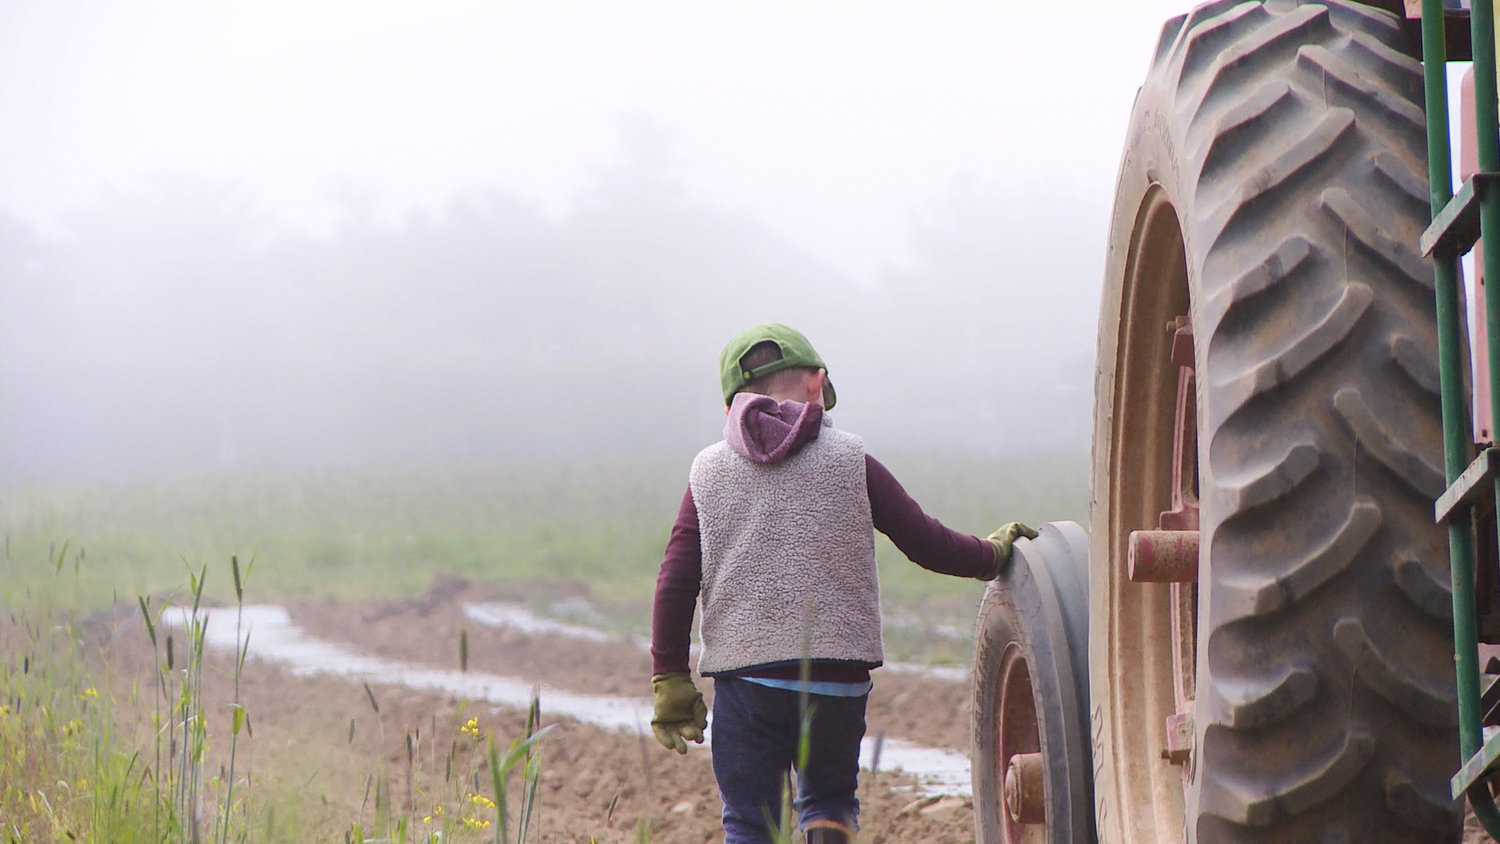 "Bartlett's Ocean View Farm," a Best of the Fest selection at the 2022 Nantucket Film Festival.